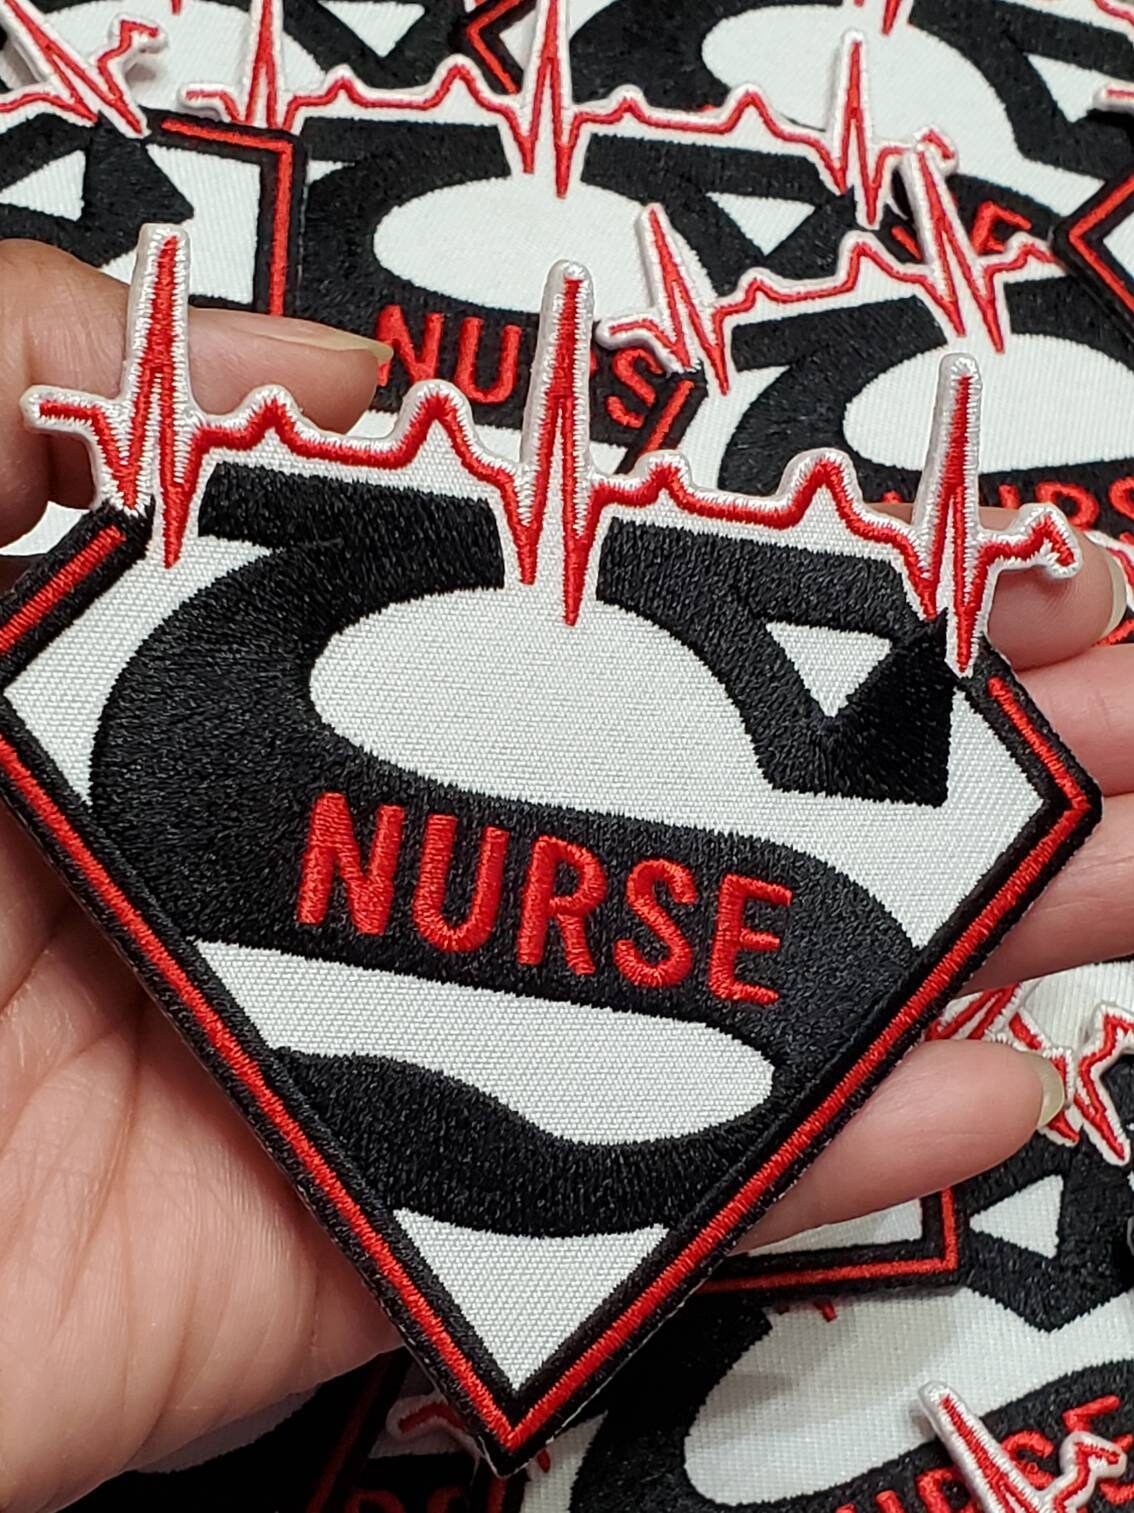 New Arrival, "Super Nurse Badge" Red/White/Black Embroidered Patch, Size 4", Iron-on Applique, DIY Patch for Clothing & Shoes